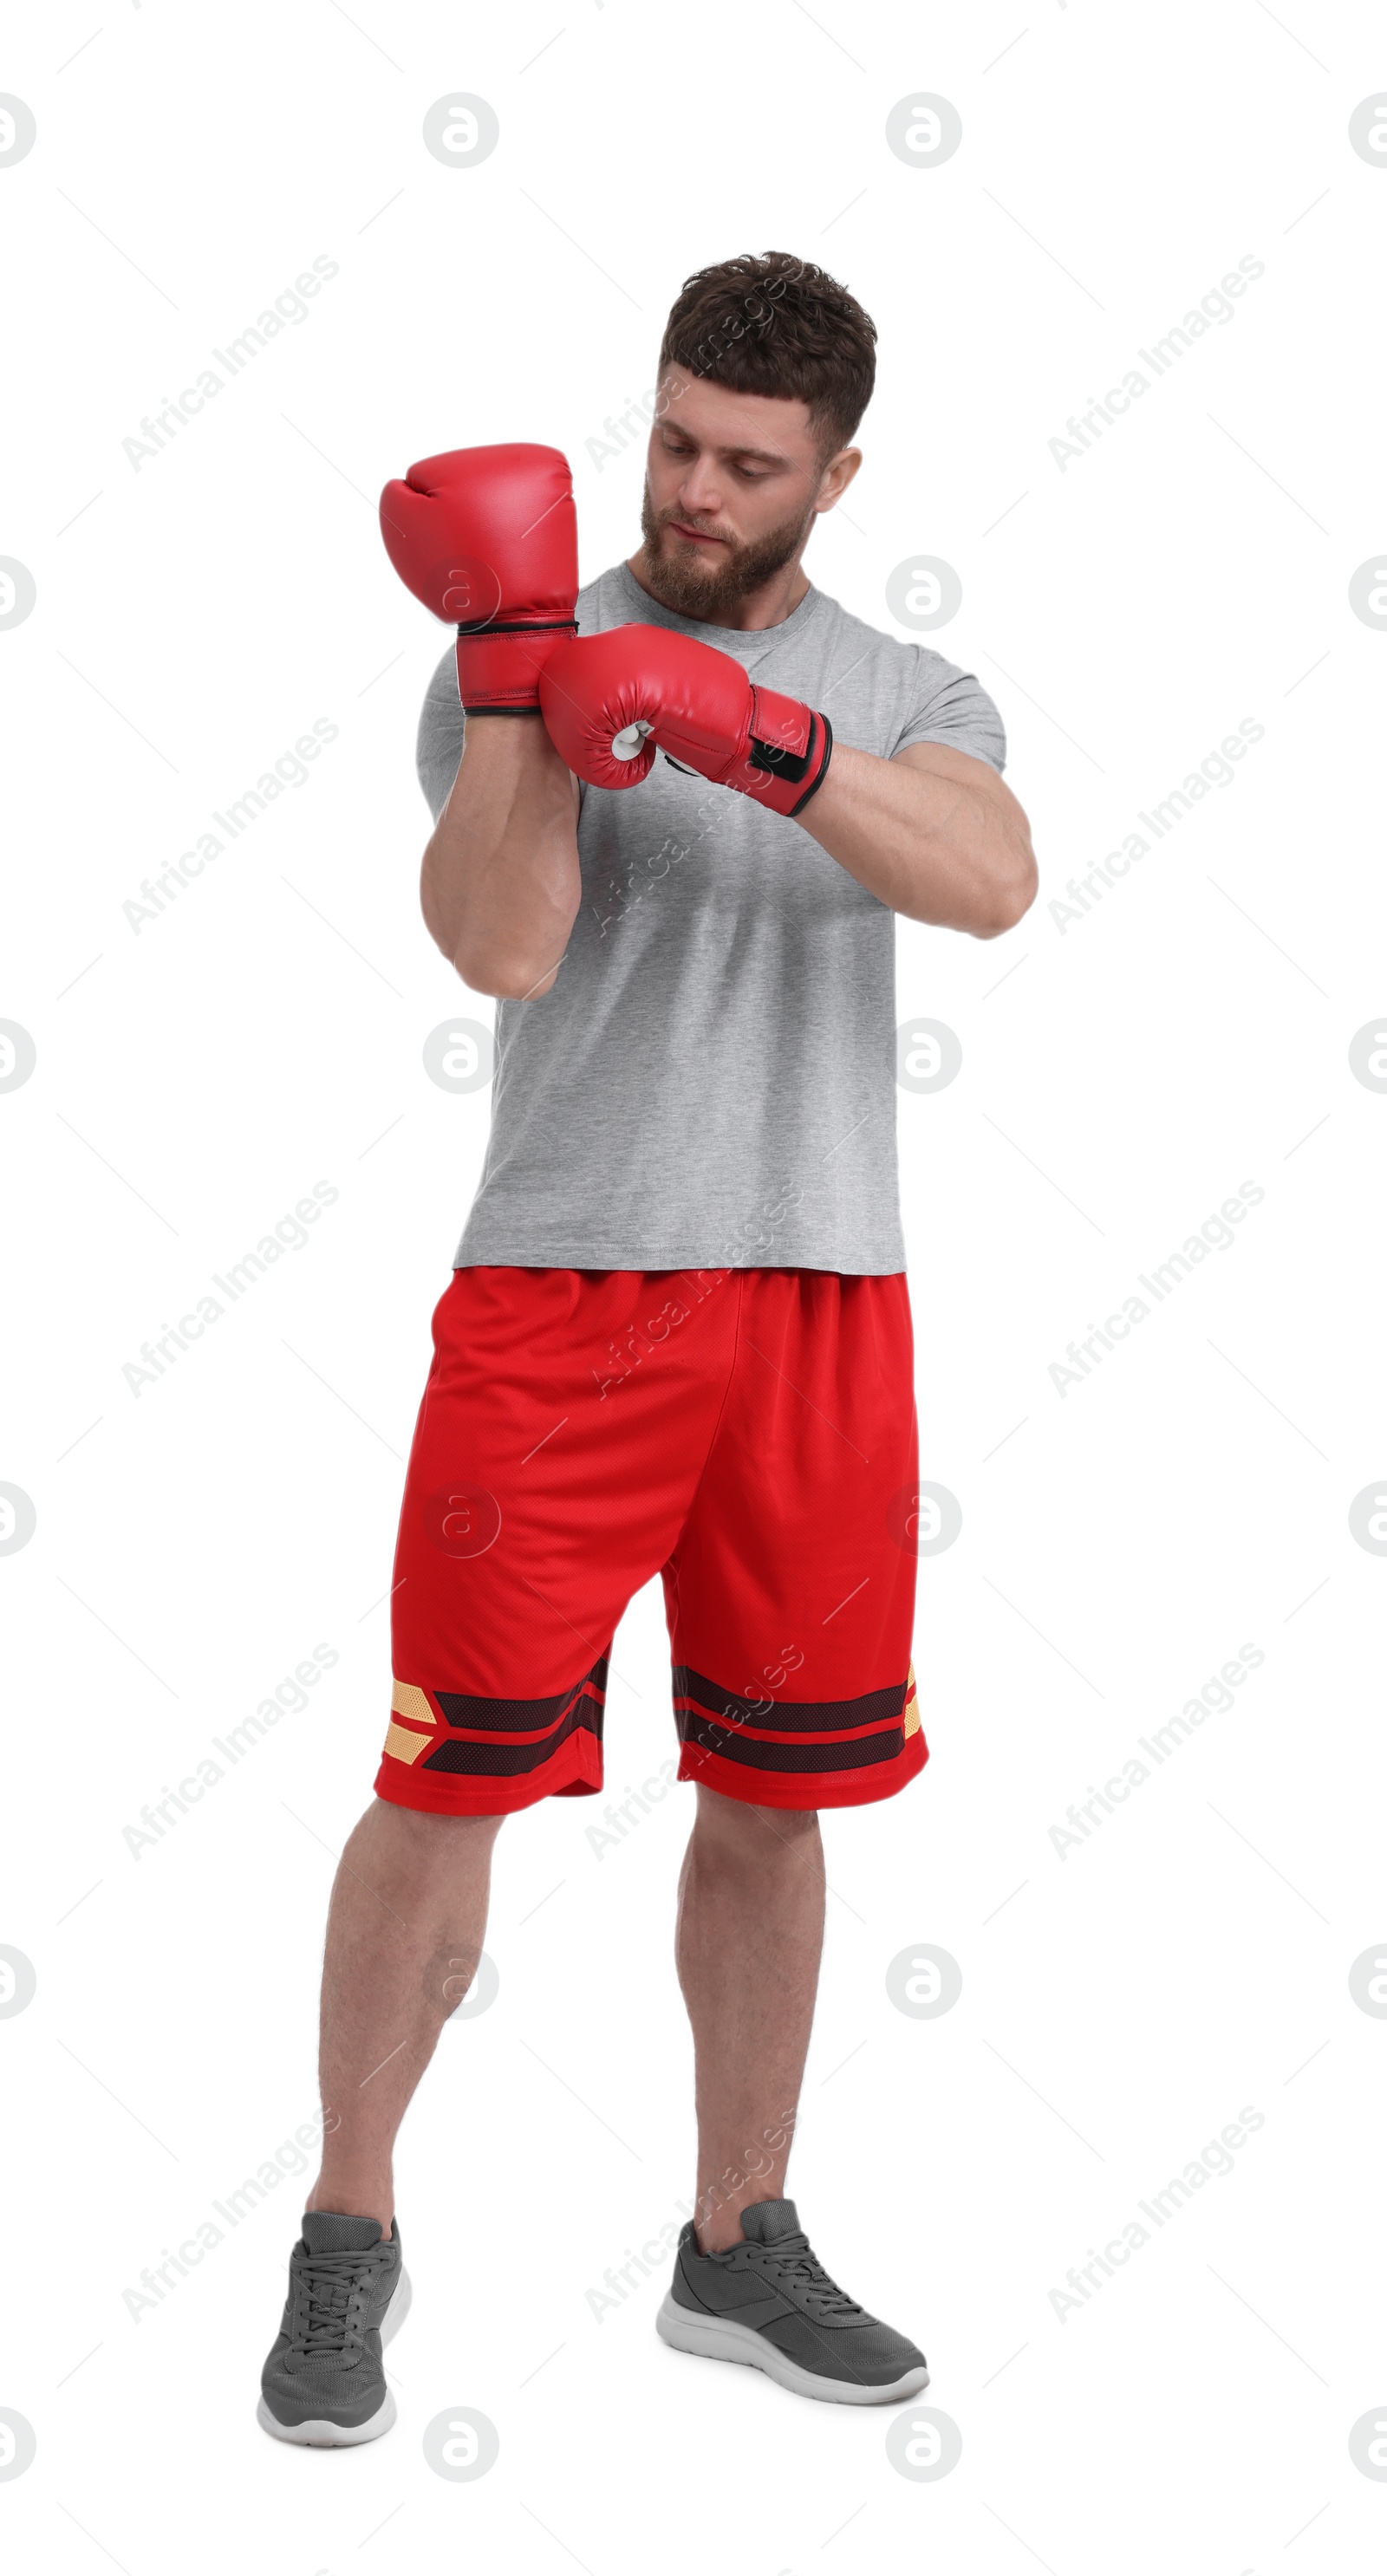 Photo of Man putting on boxing gloves against white background